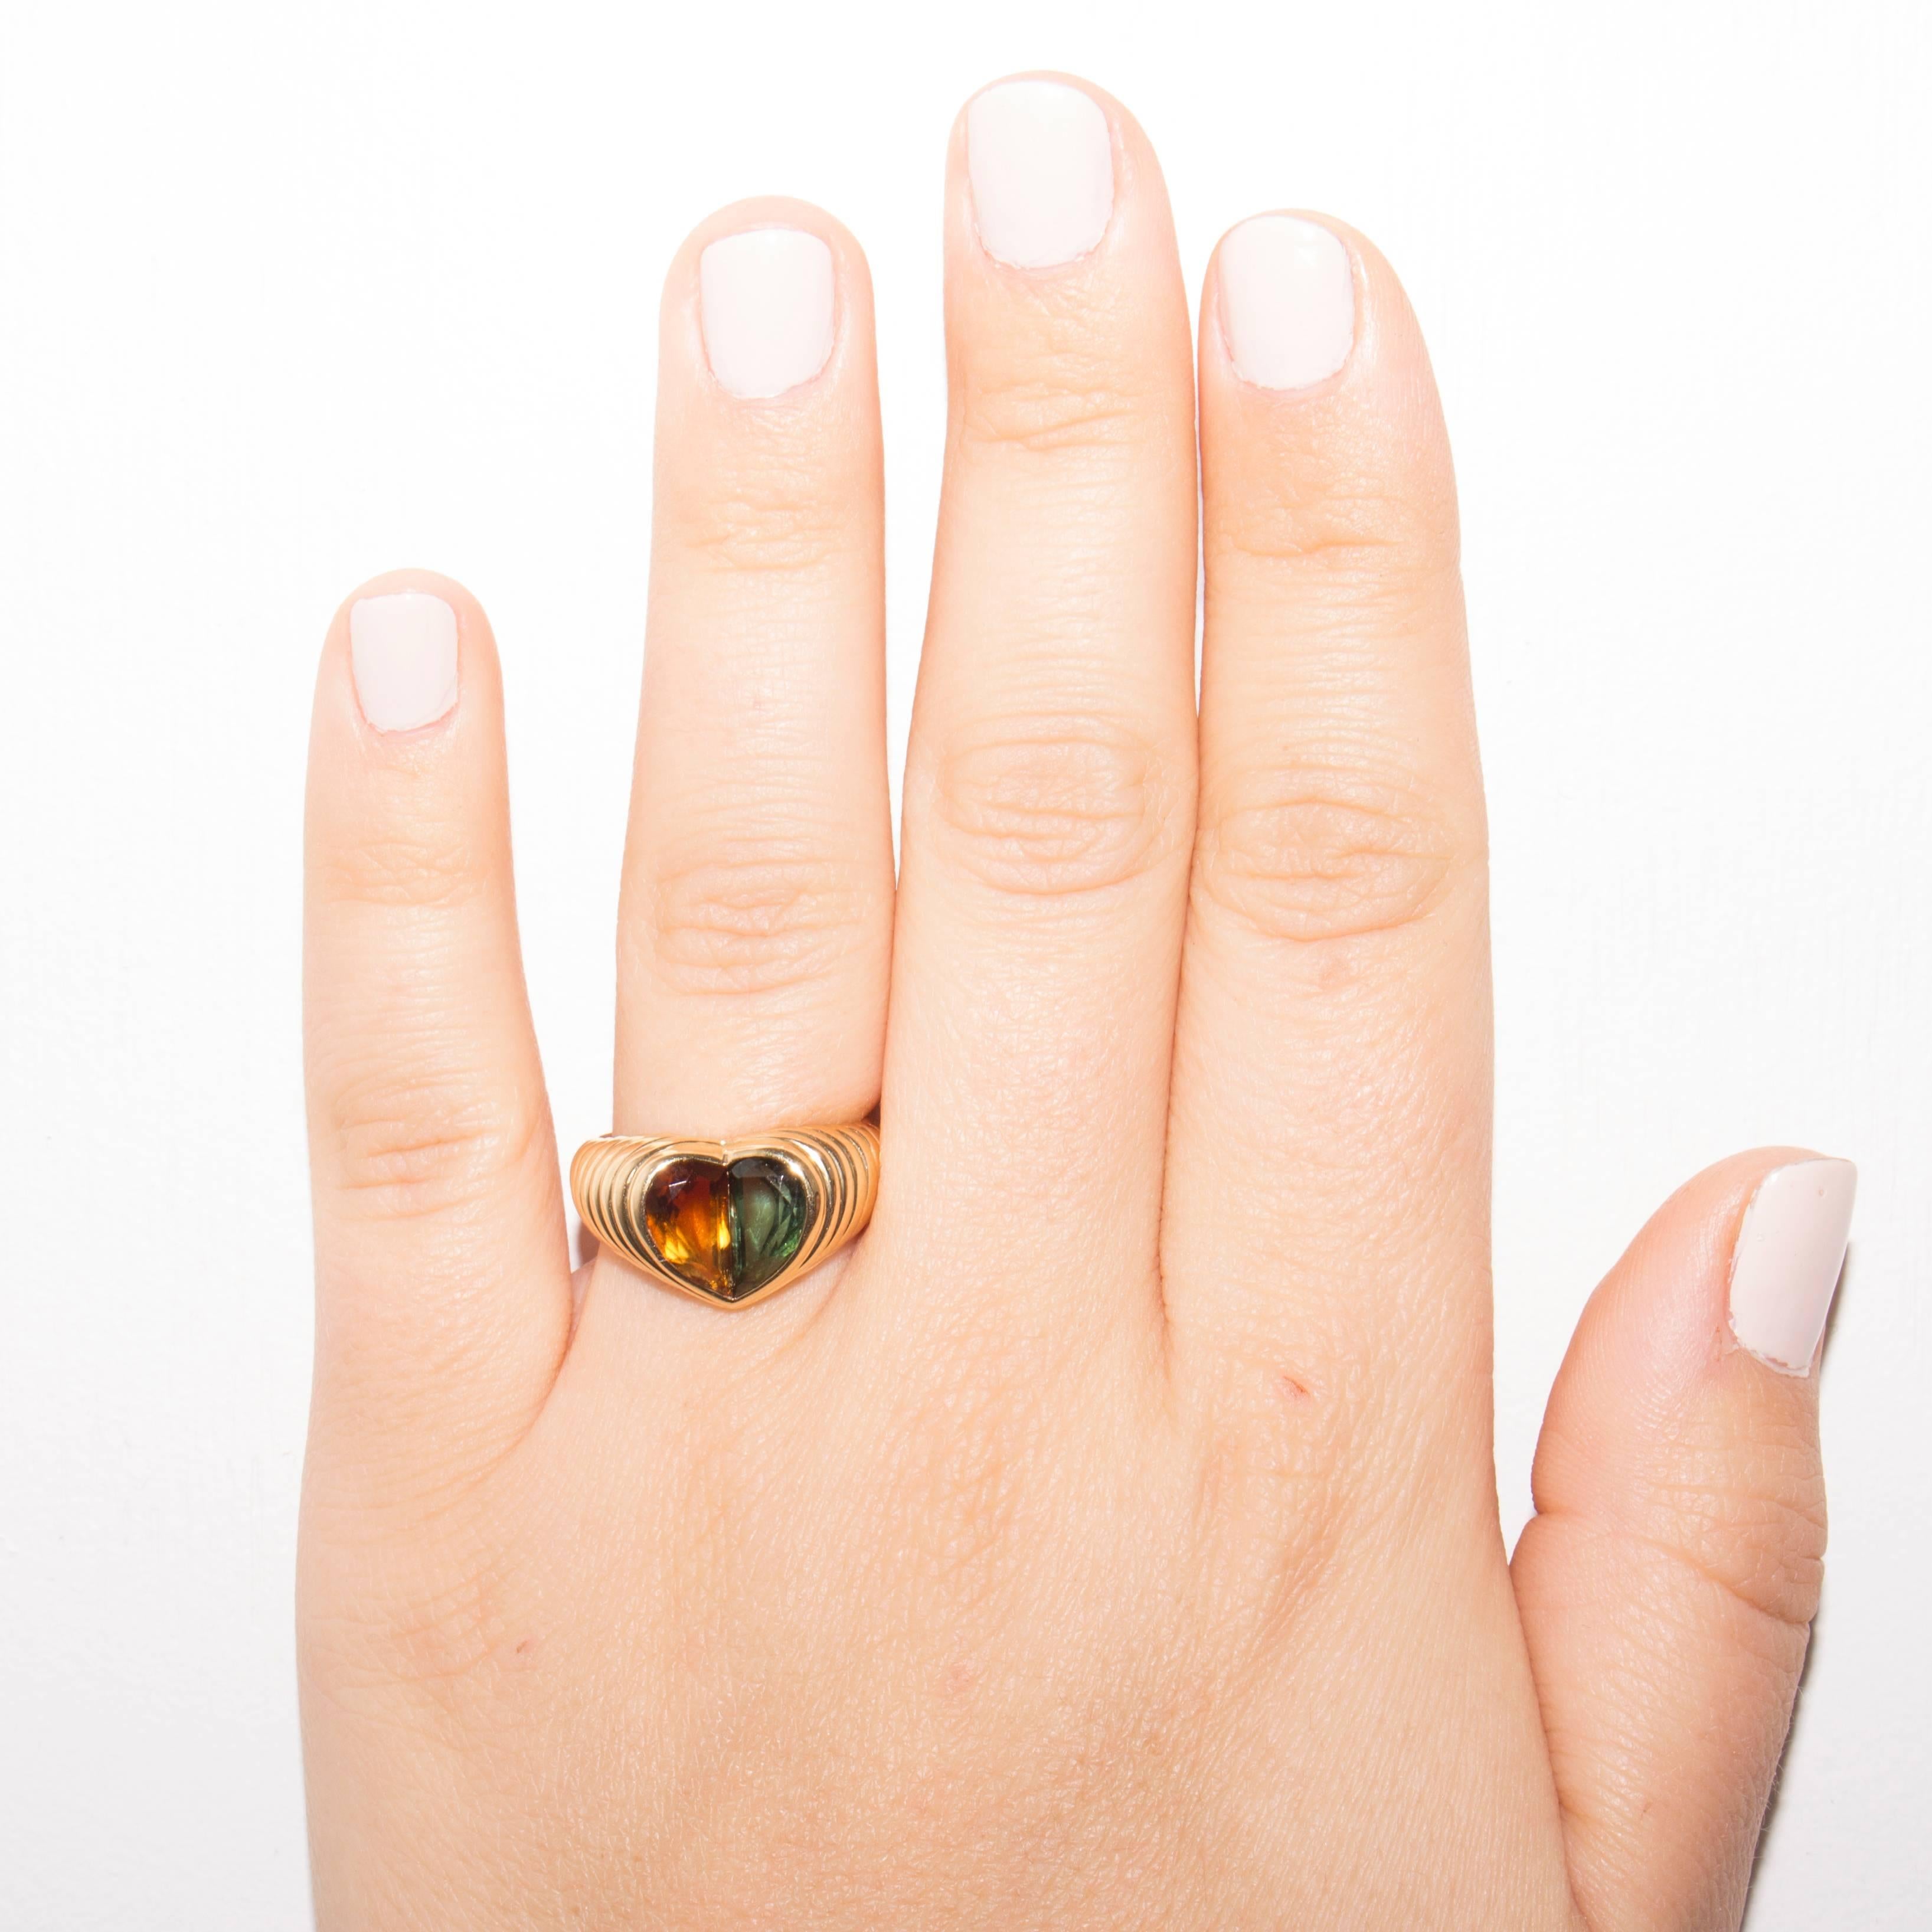 Stylish and colorful from Bulgari. Designed with a golden citrine and a green tourmaline set amid rolling contours of 18k gold. Signed Bvlgari. Ring size 6-1/2 and may be resized.

